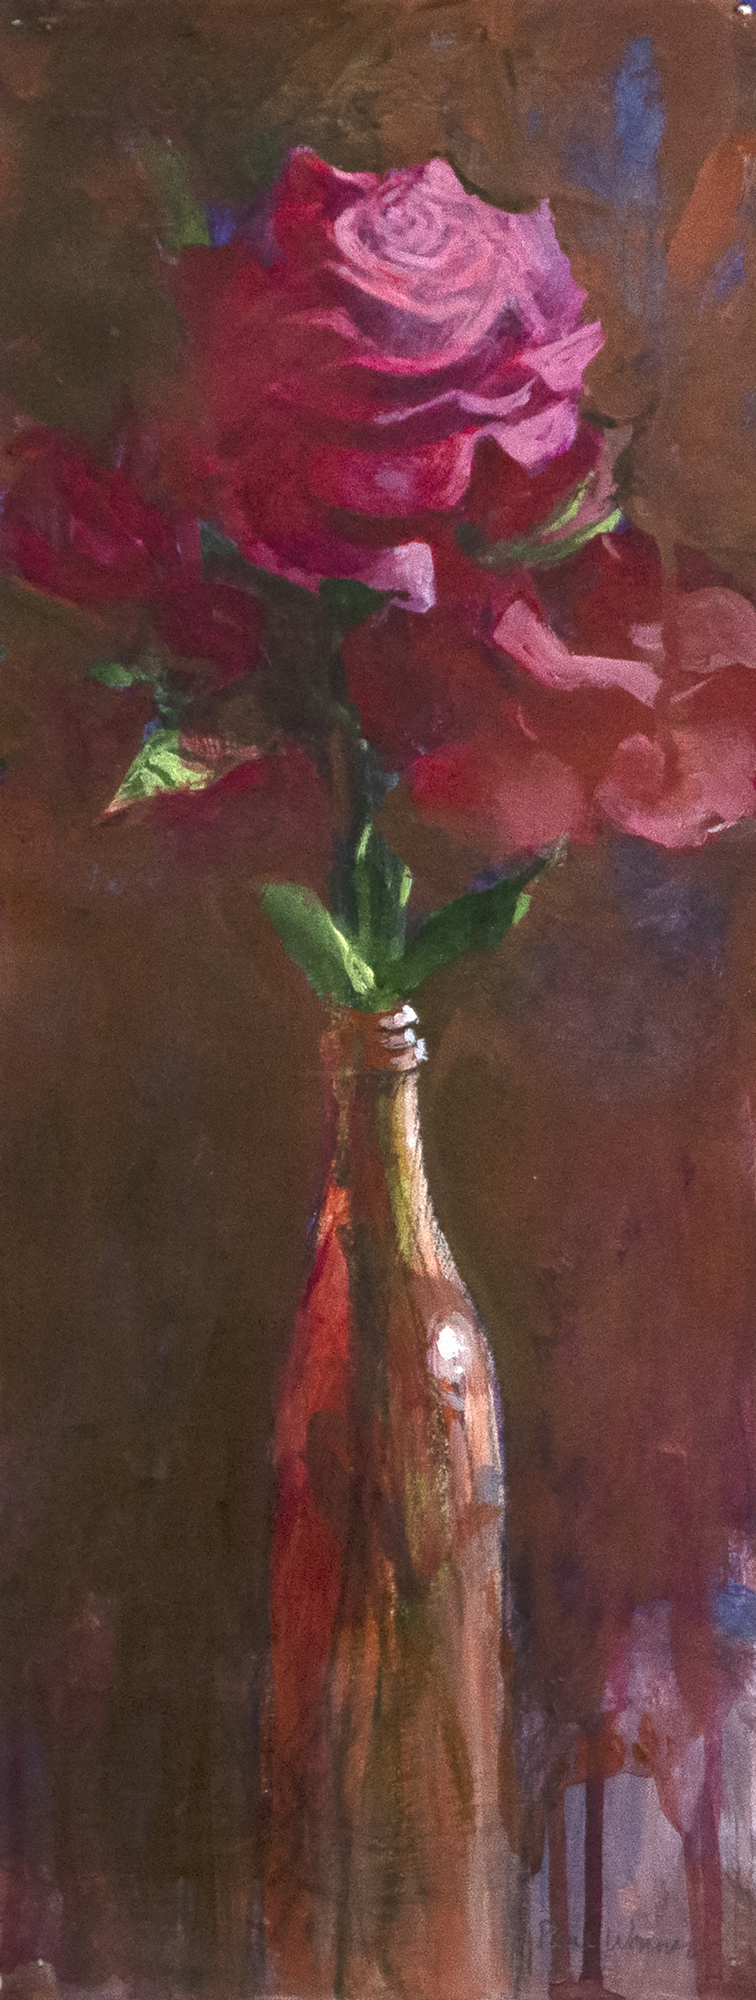 PAUL WONNER - Flowers in Bottles: Red Roses - acrylic on paper - 19 1/4 x 7 1/2 in.